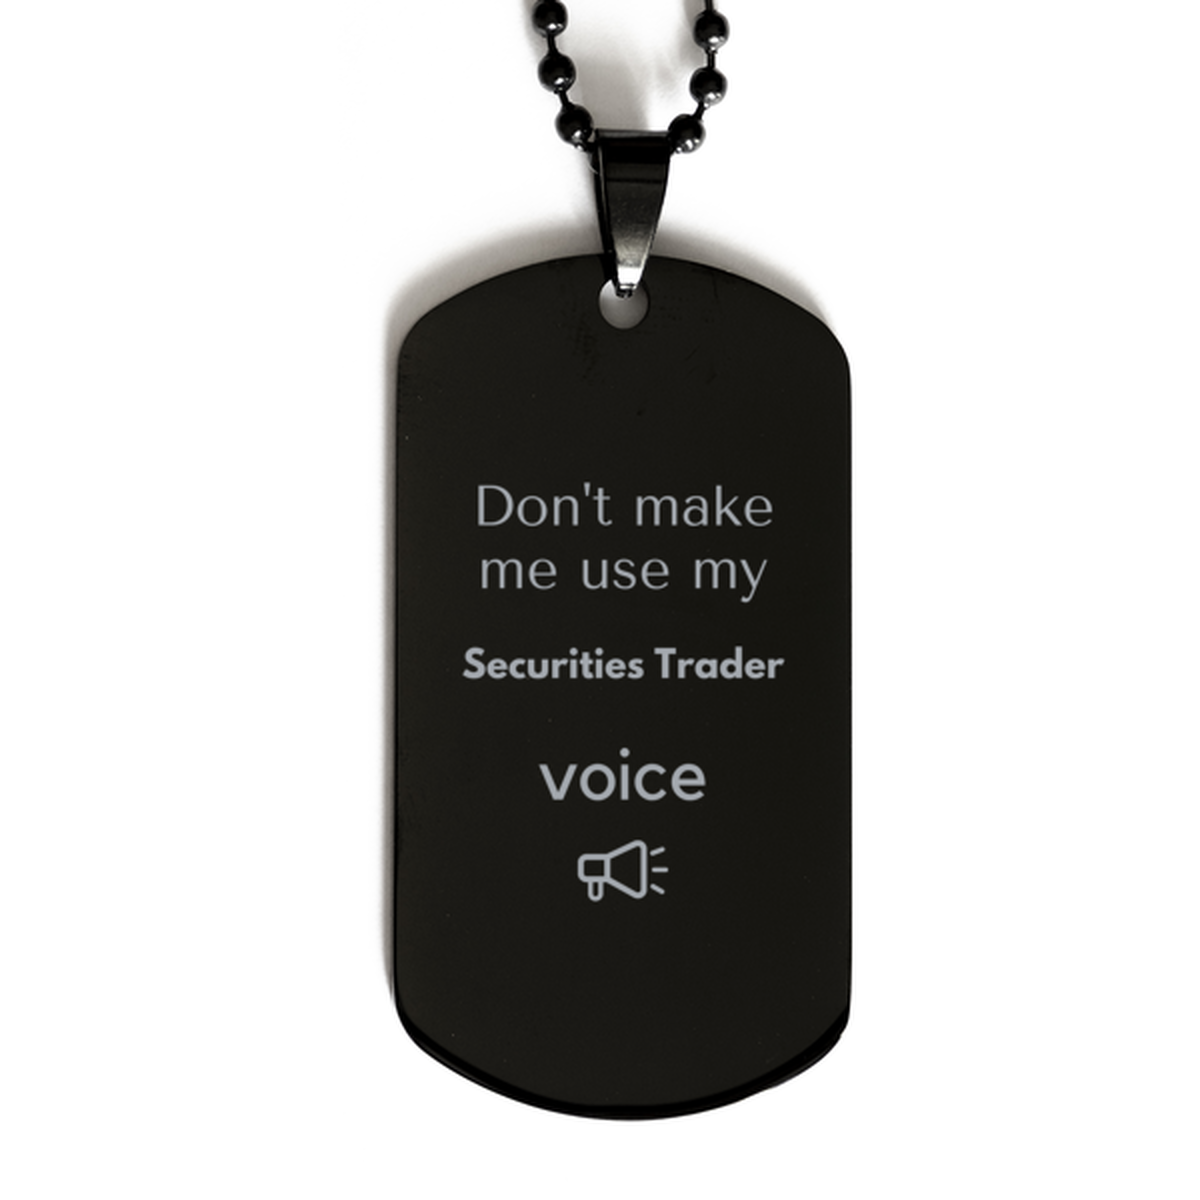 Don't make me use my Securities Trader voice, Sarcasm Securities Trader Gifts, Christmas Securities Trader Black Dog Tag Birthday Unique Gifts For Securities Trader Coworkers, Men, Women, Colleague, Friends